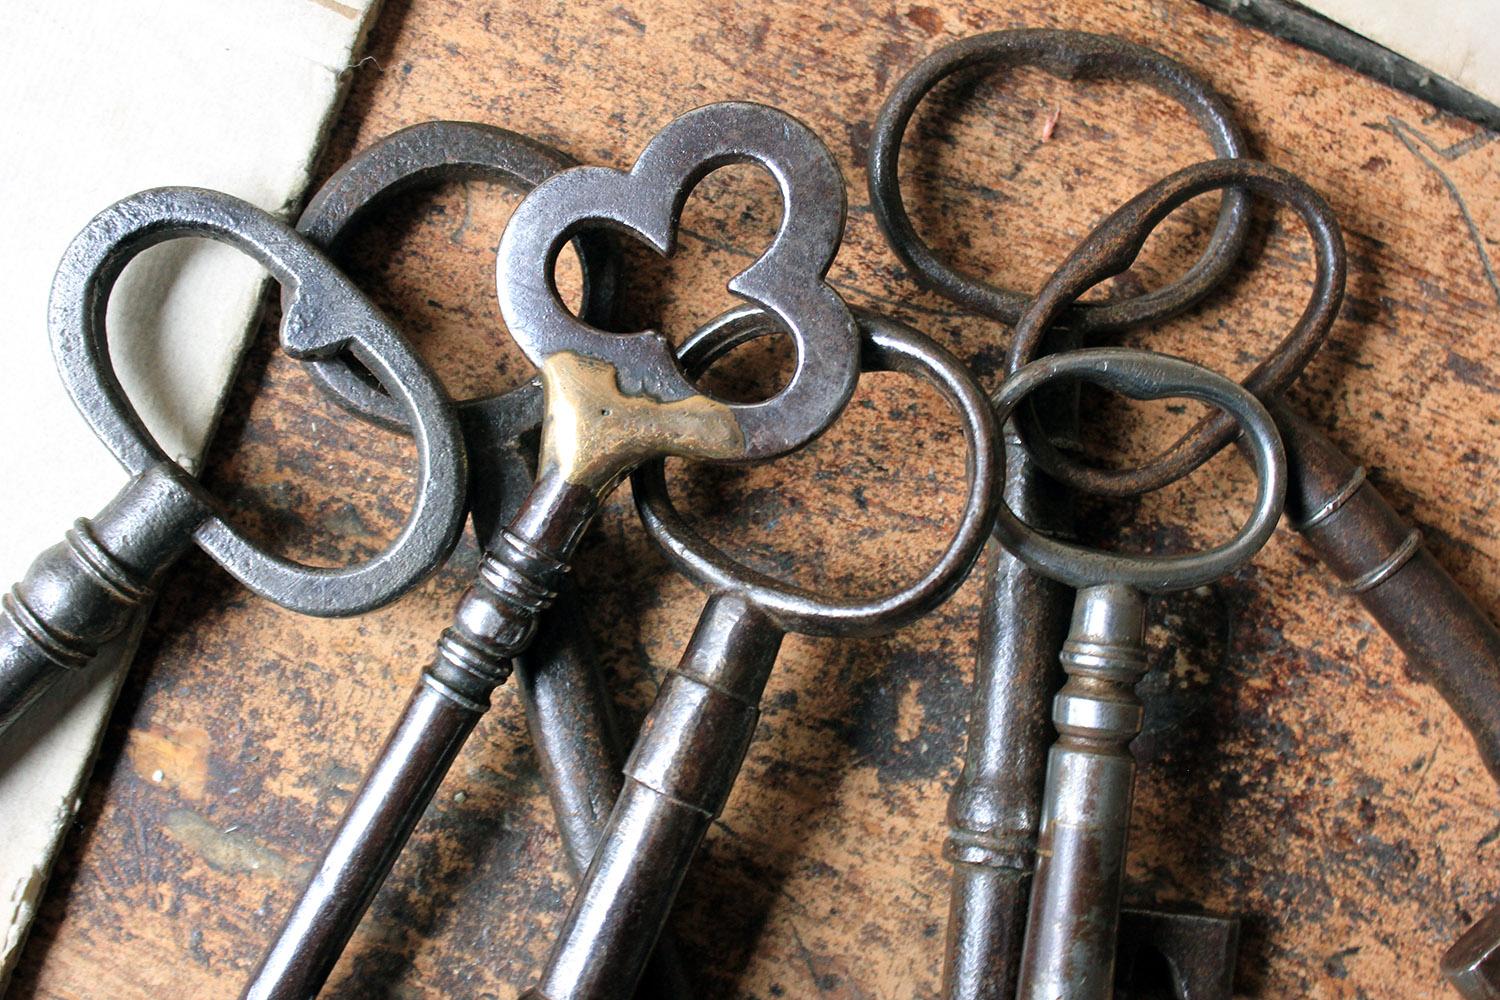 The collection of silver and iron antique keys, with differing bows, with examples from the Georgian period to the early Victorian, and each with a good patina.

The keys are is all in good condition with slight rusting commensurate with age and